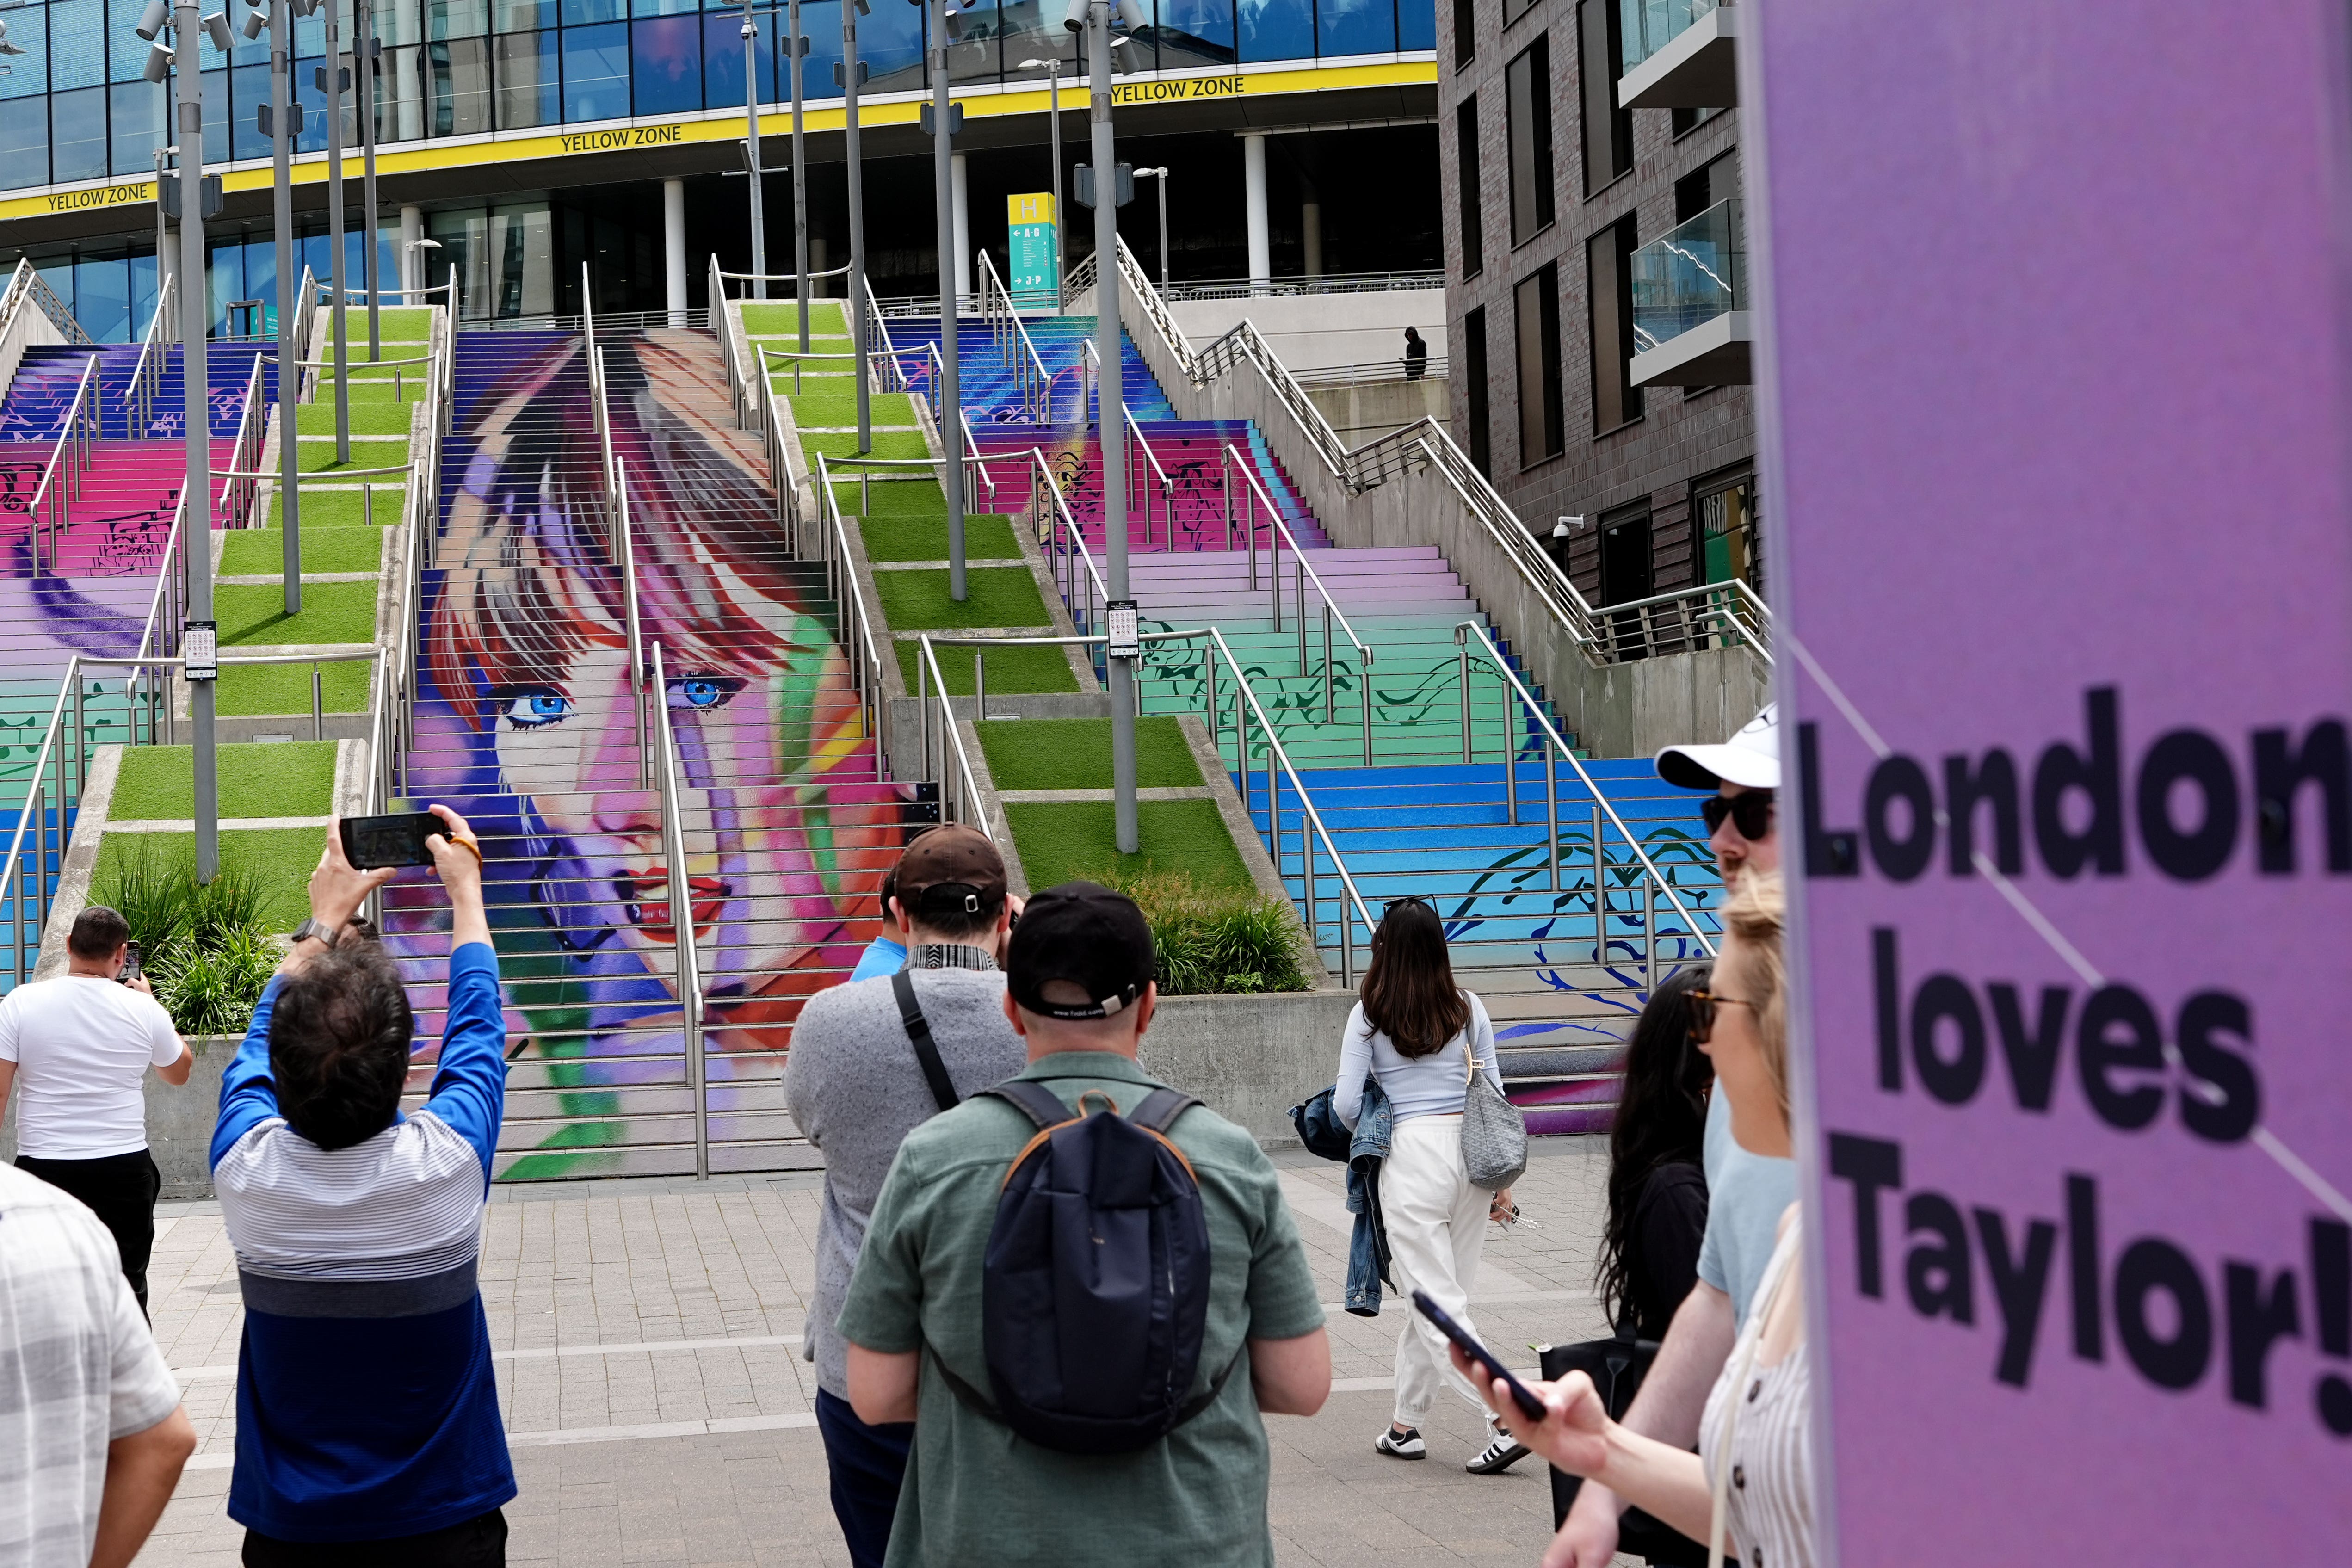 A mural of Taylor Swift on the Spanish Steps outside Wembley Stadium in London (Aaron Chown/PA)